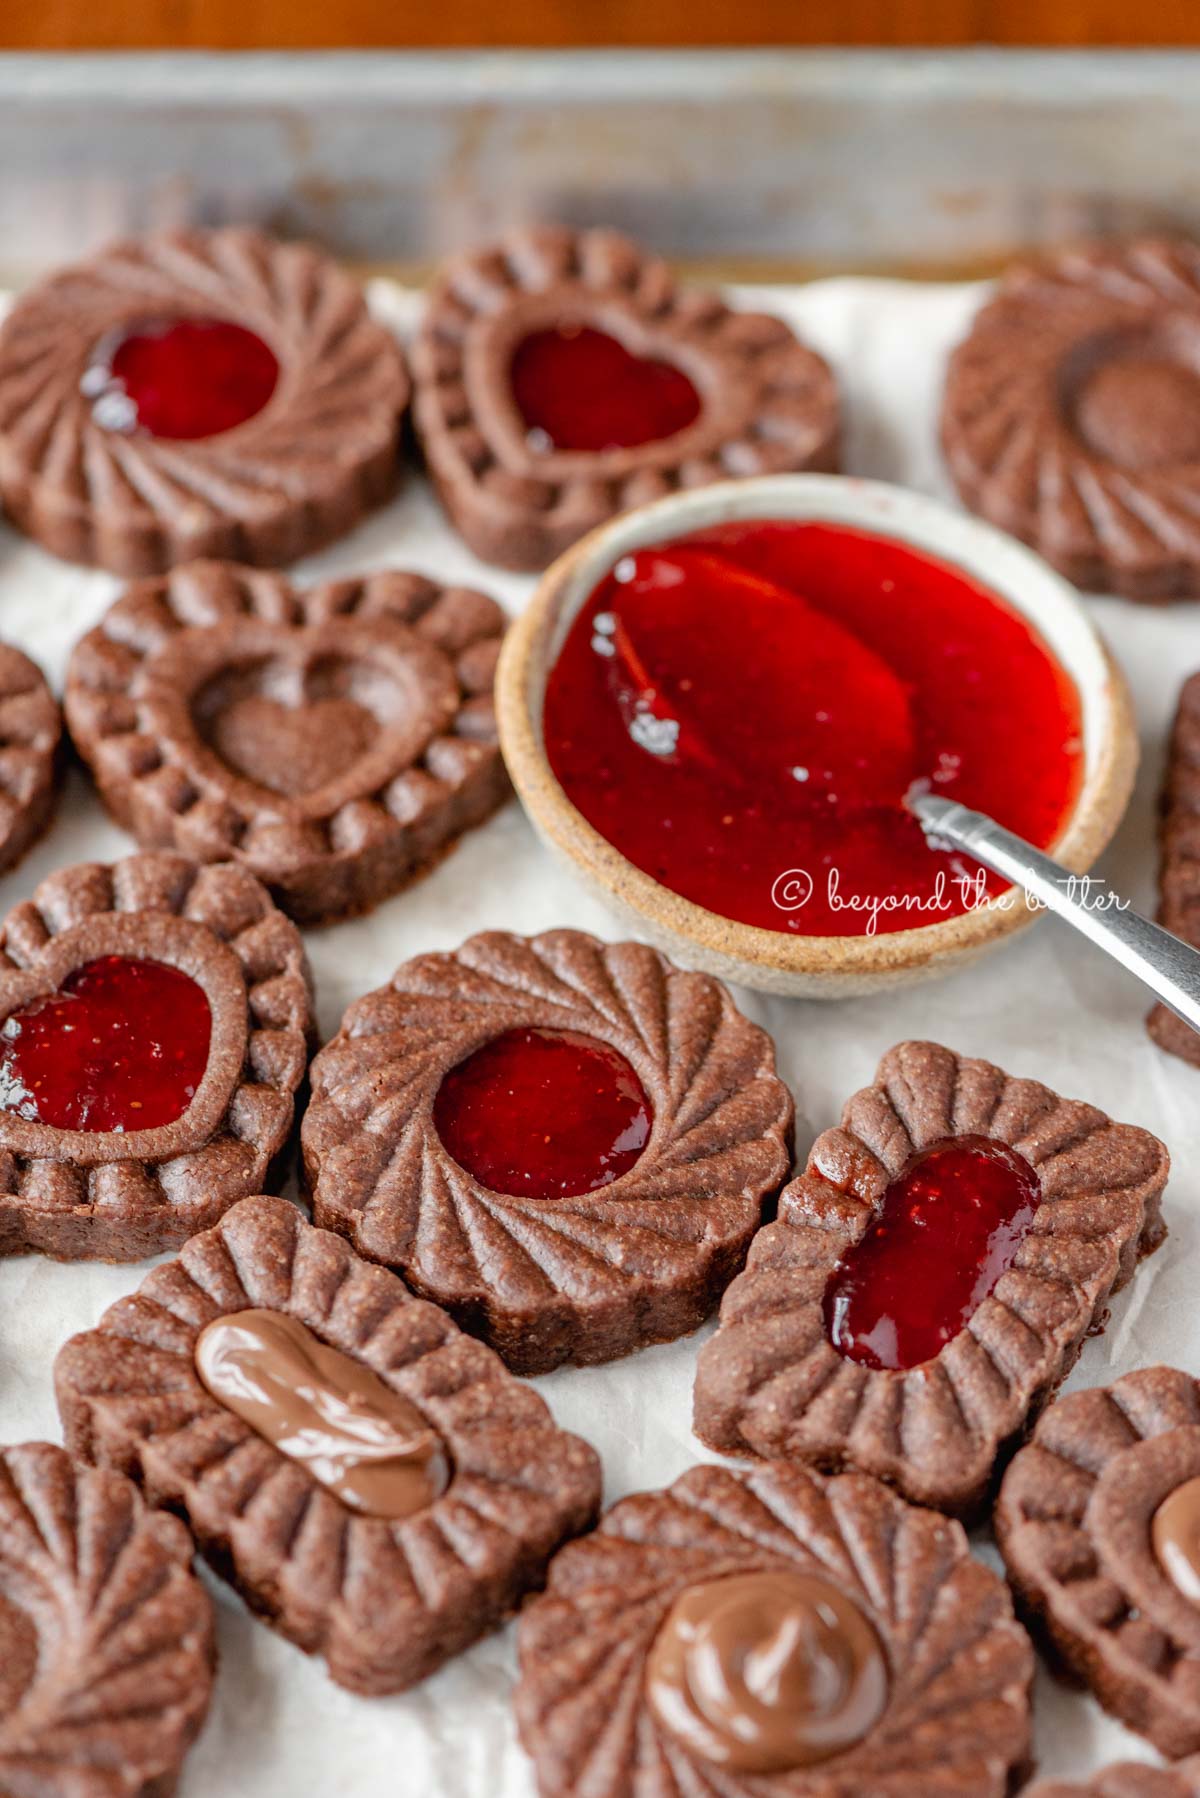 Parchment lined baking sheet full of chocolate thumbprint cookies with small bowl of strawberry jam and spoon | All Images © Beyond the Butter®